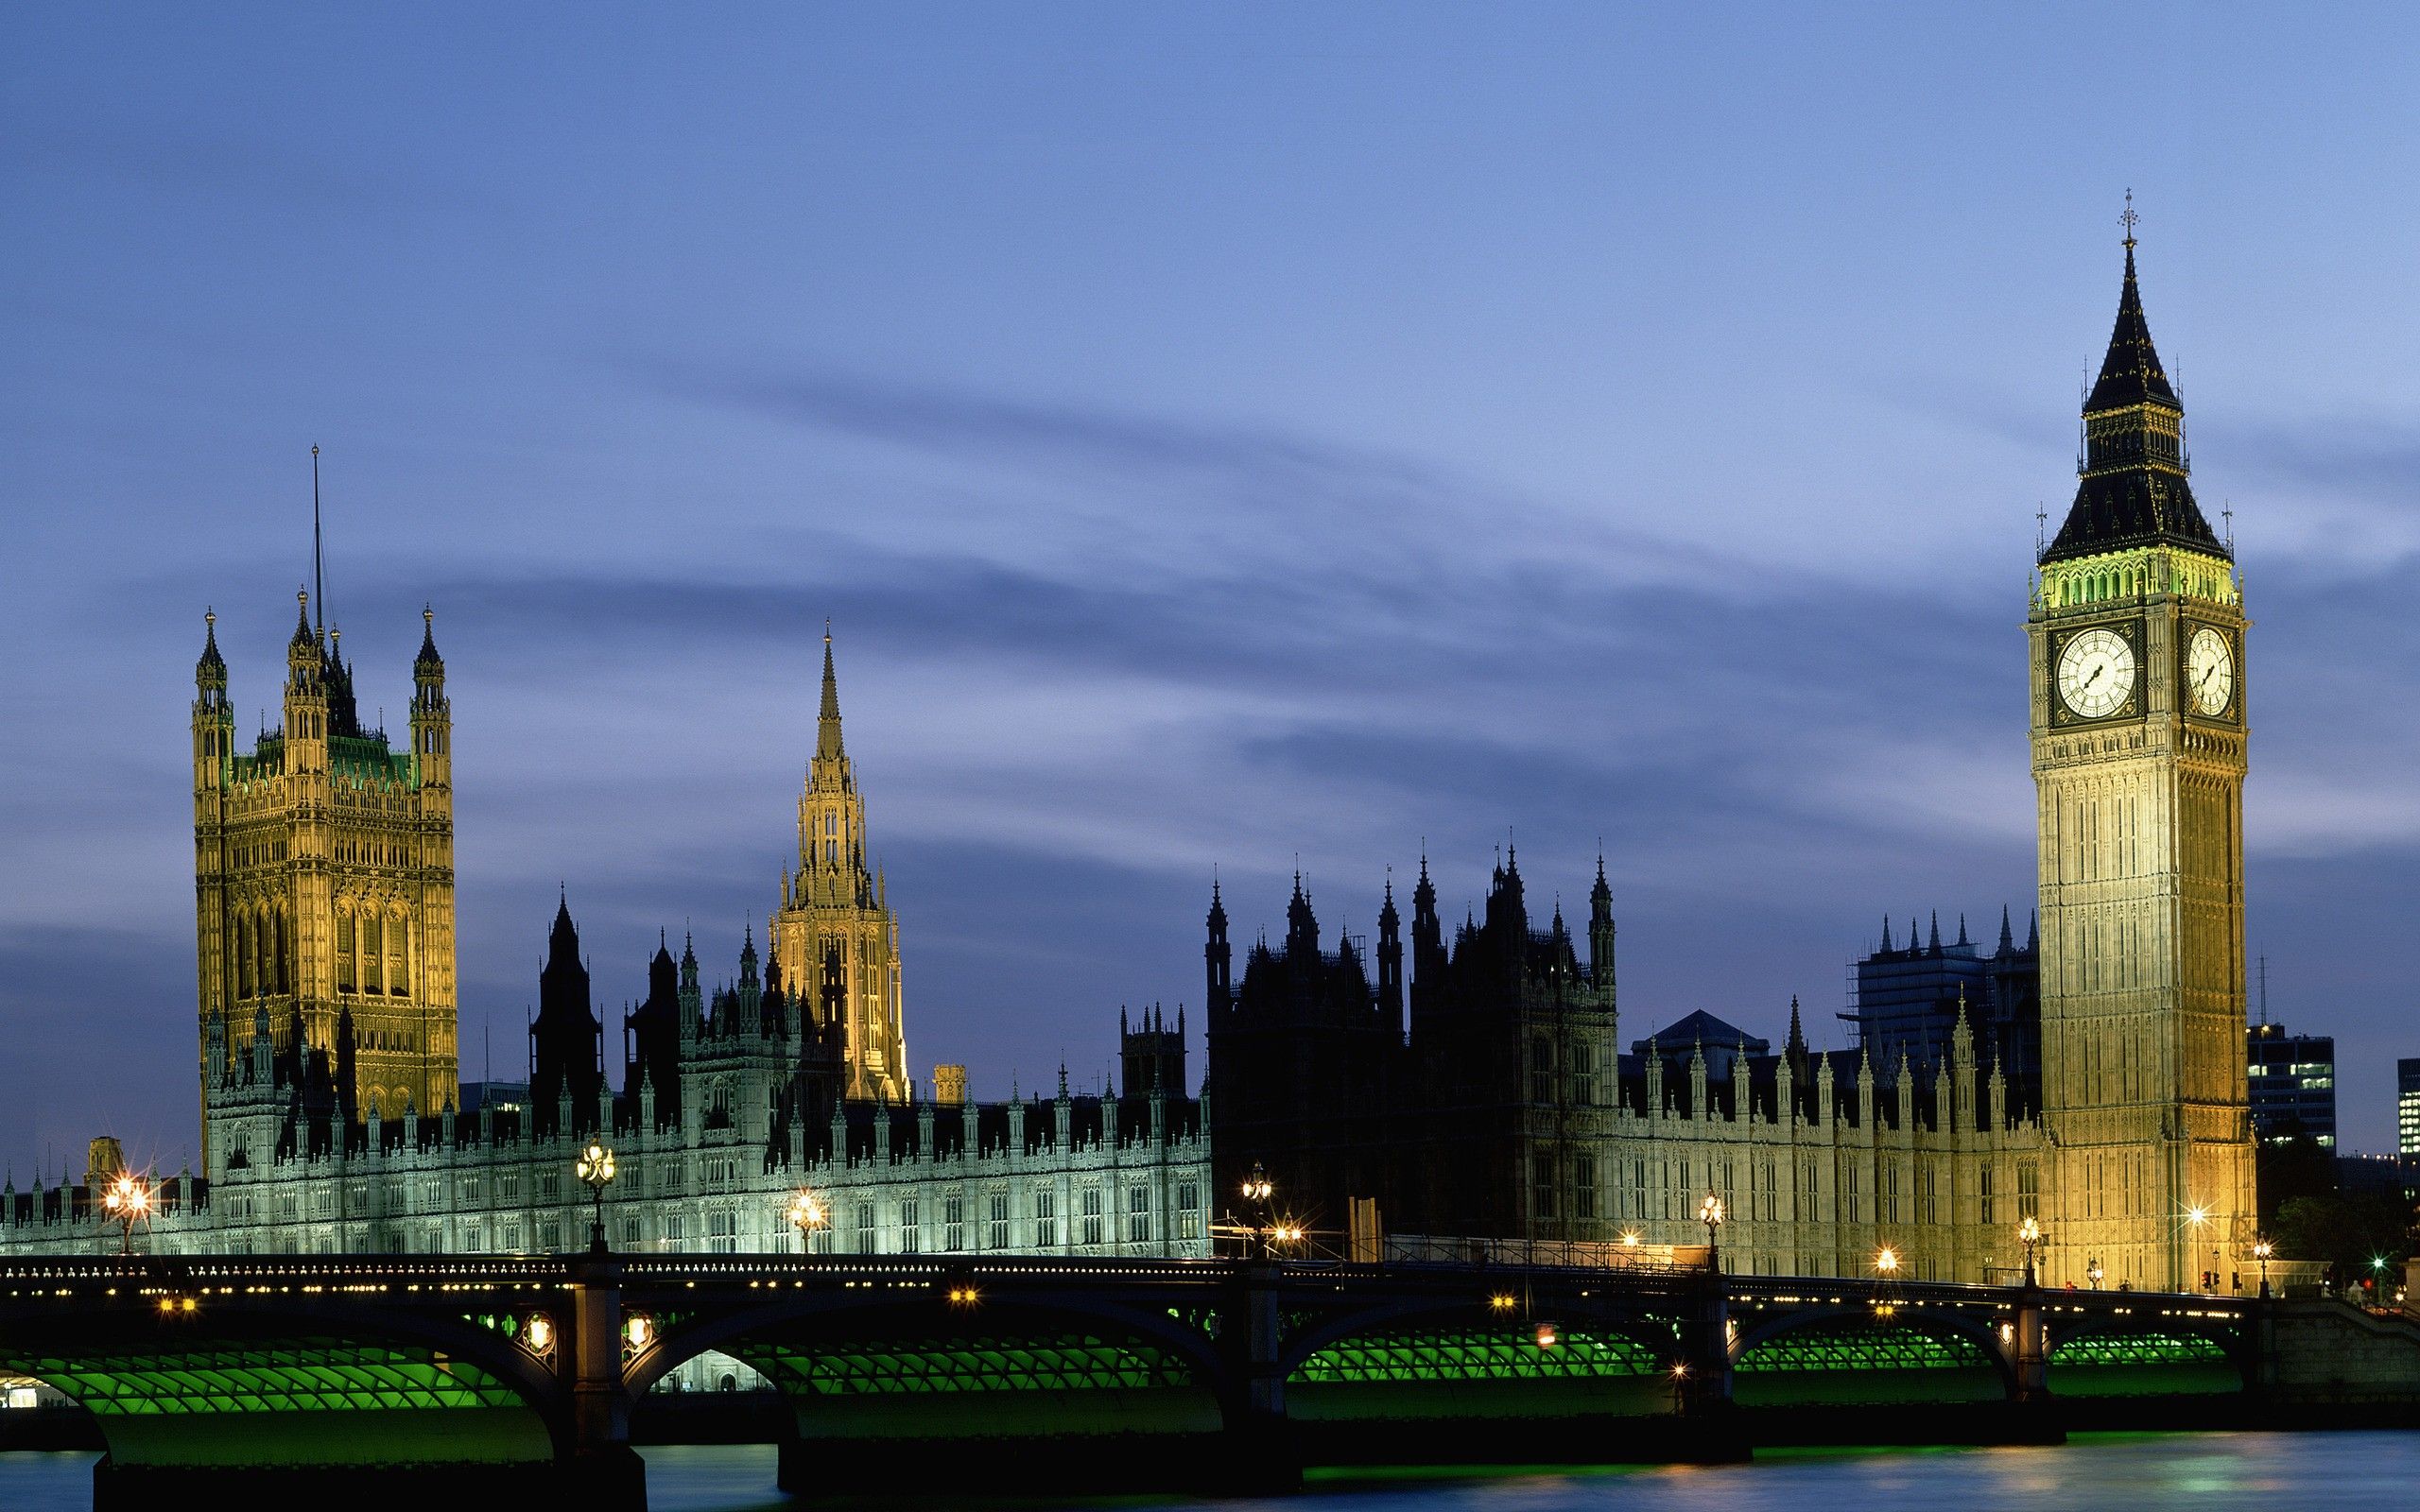 cityscapes, night, London, buildings, Big Ben, Palace of Westminster, River Thames, Westminster Bridge wallpaper